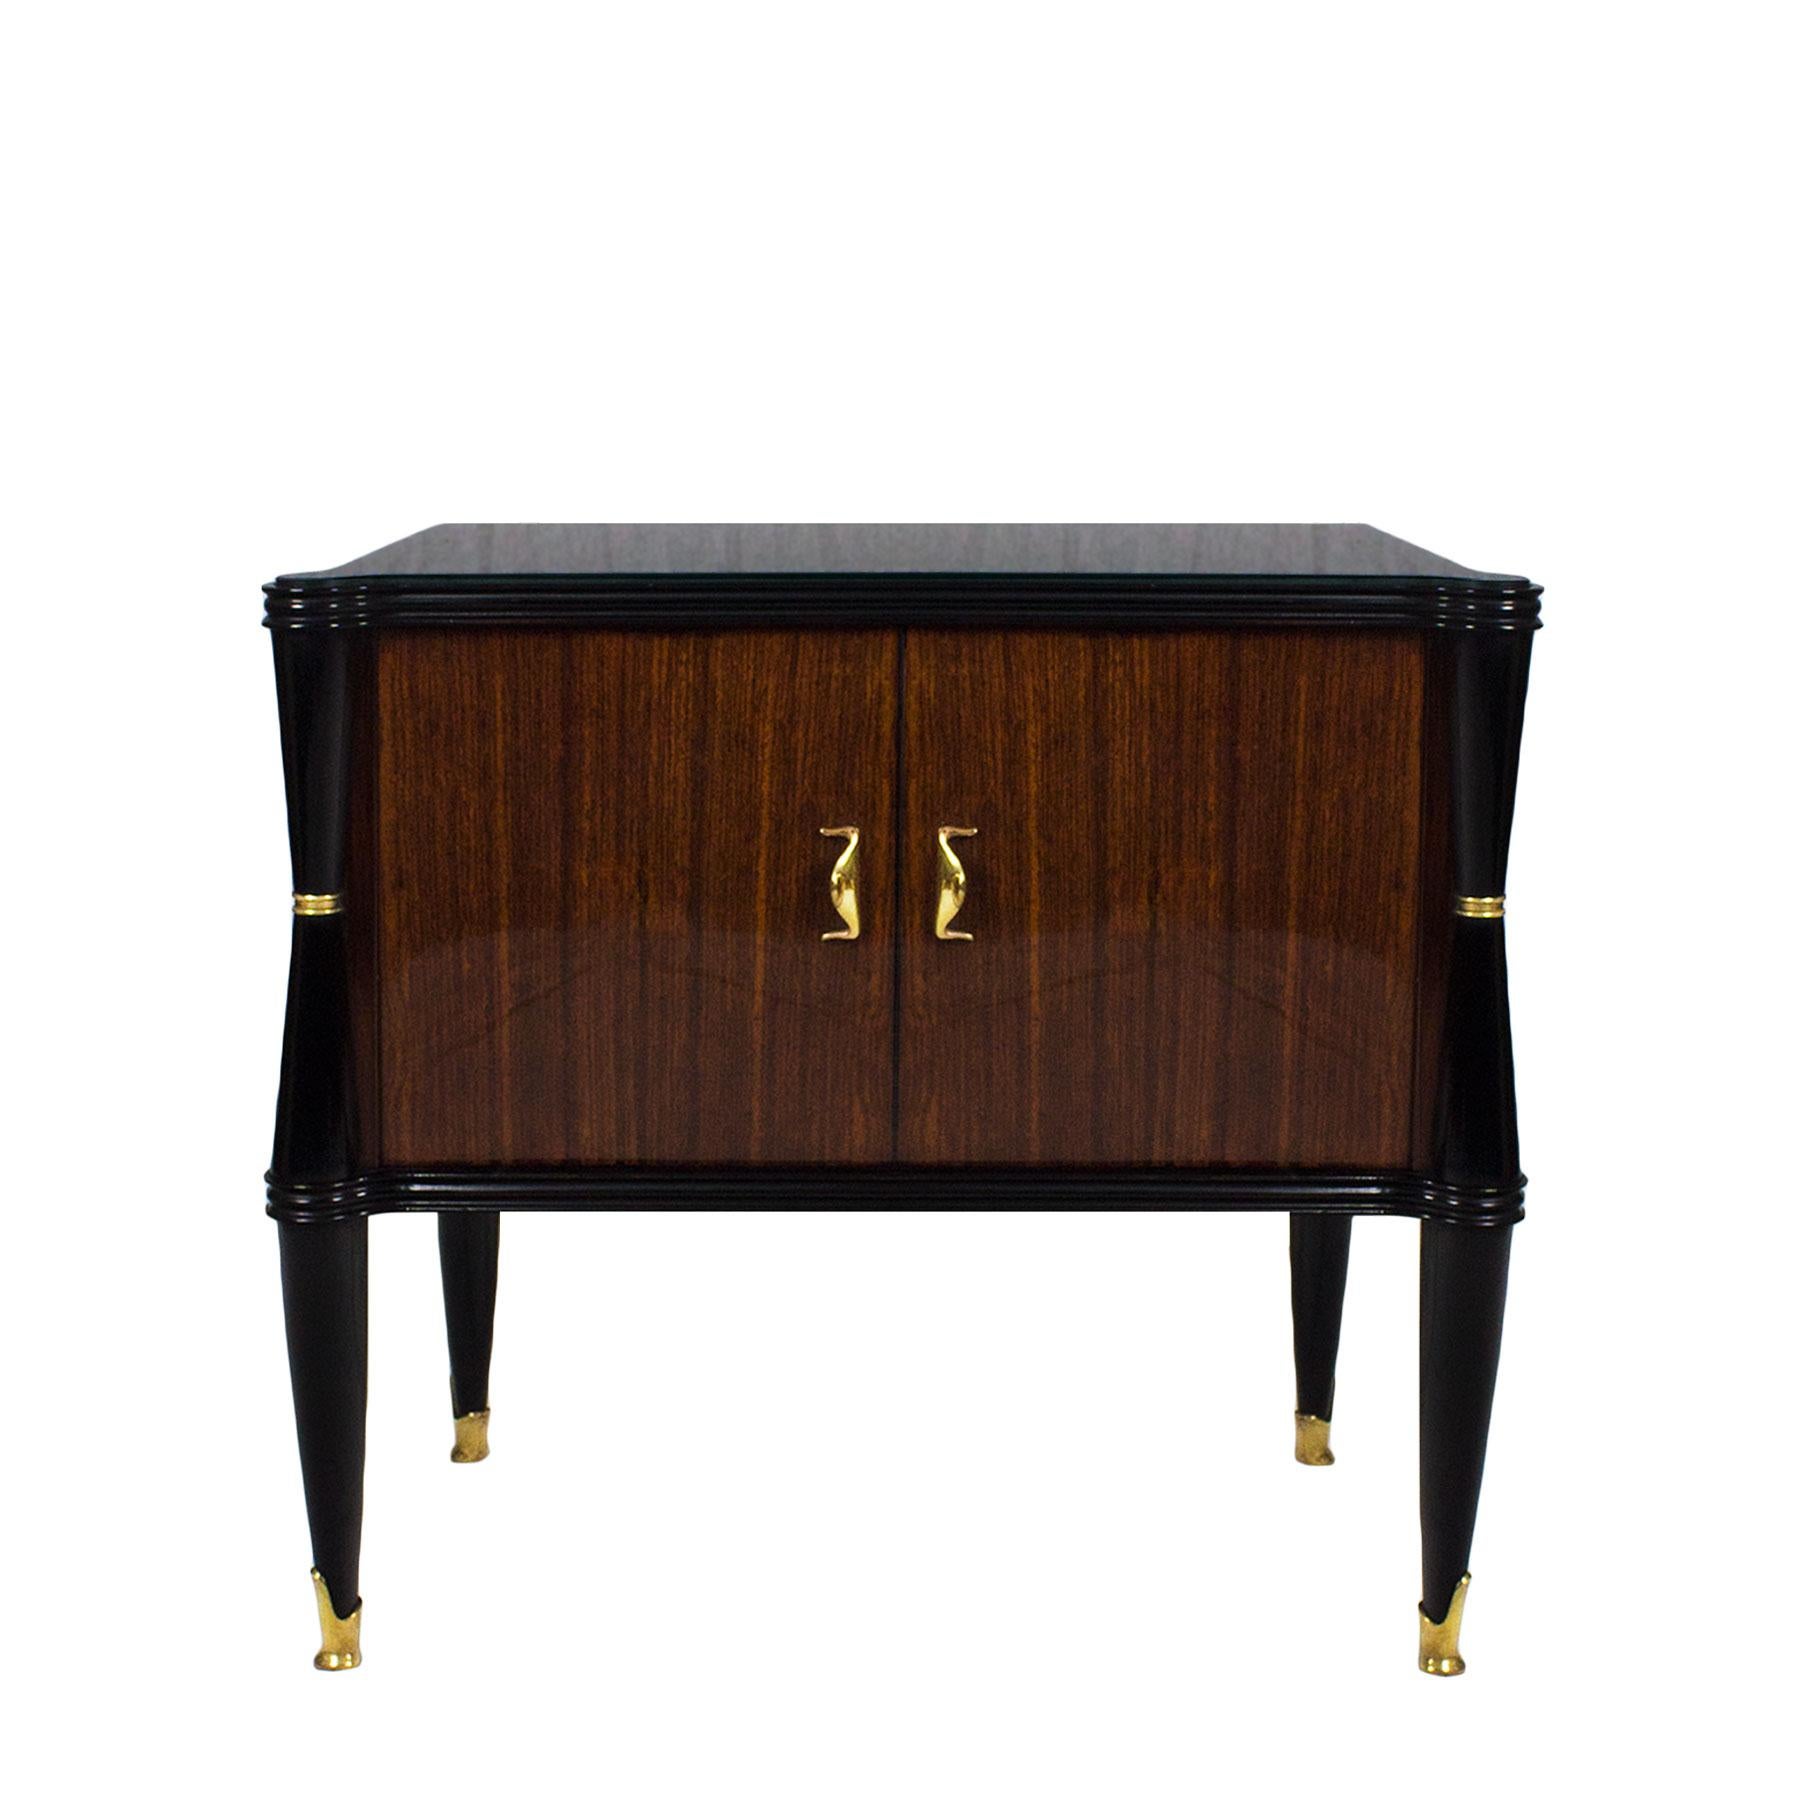 Large pair of nightstands, solid wood and mahogany veneer, stained solid mahogany stands, two doors with ash wood interior, French polish. Polished solid brass handles and feet. Black opaline on top.
In the style of Vittorio Dassi,

Italy, circa